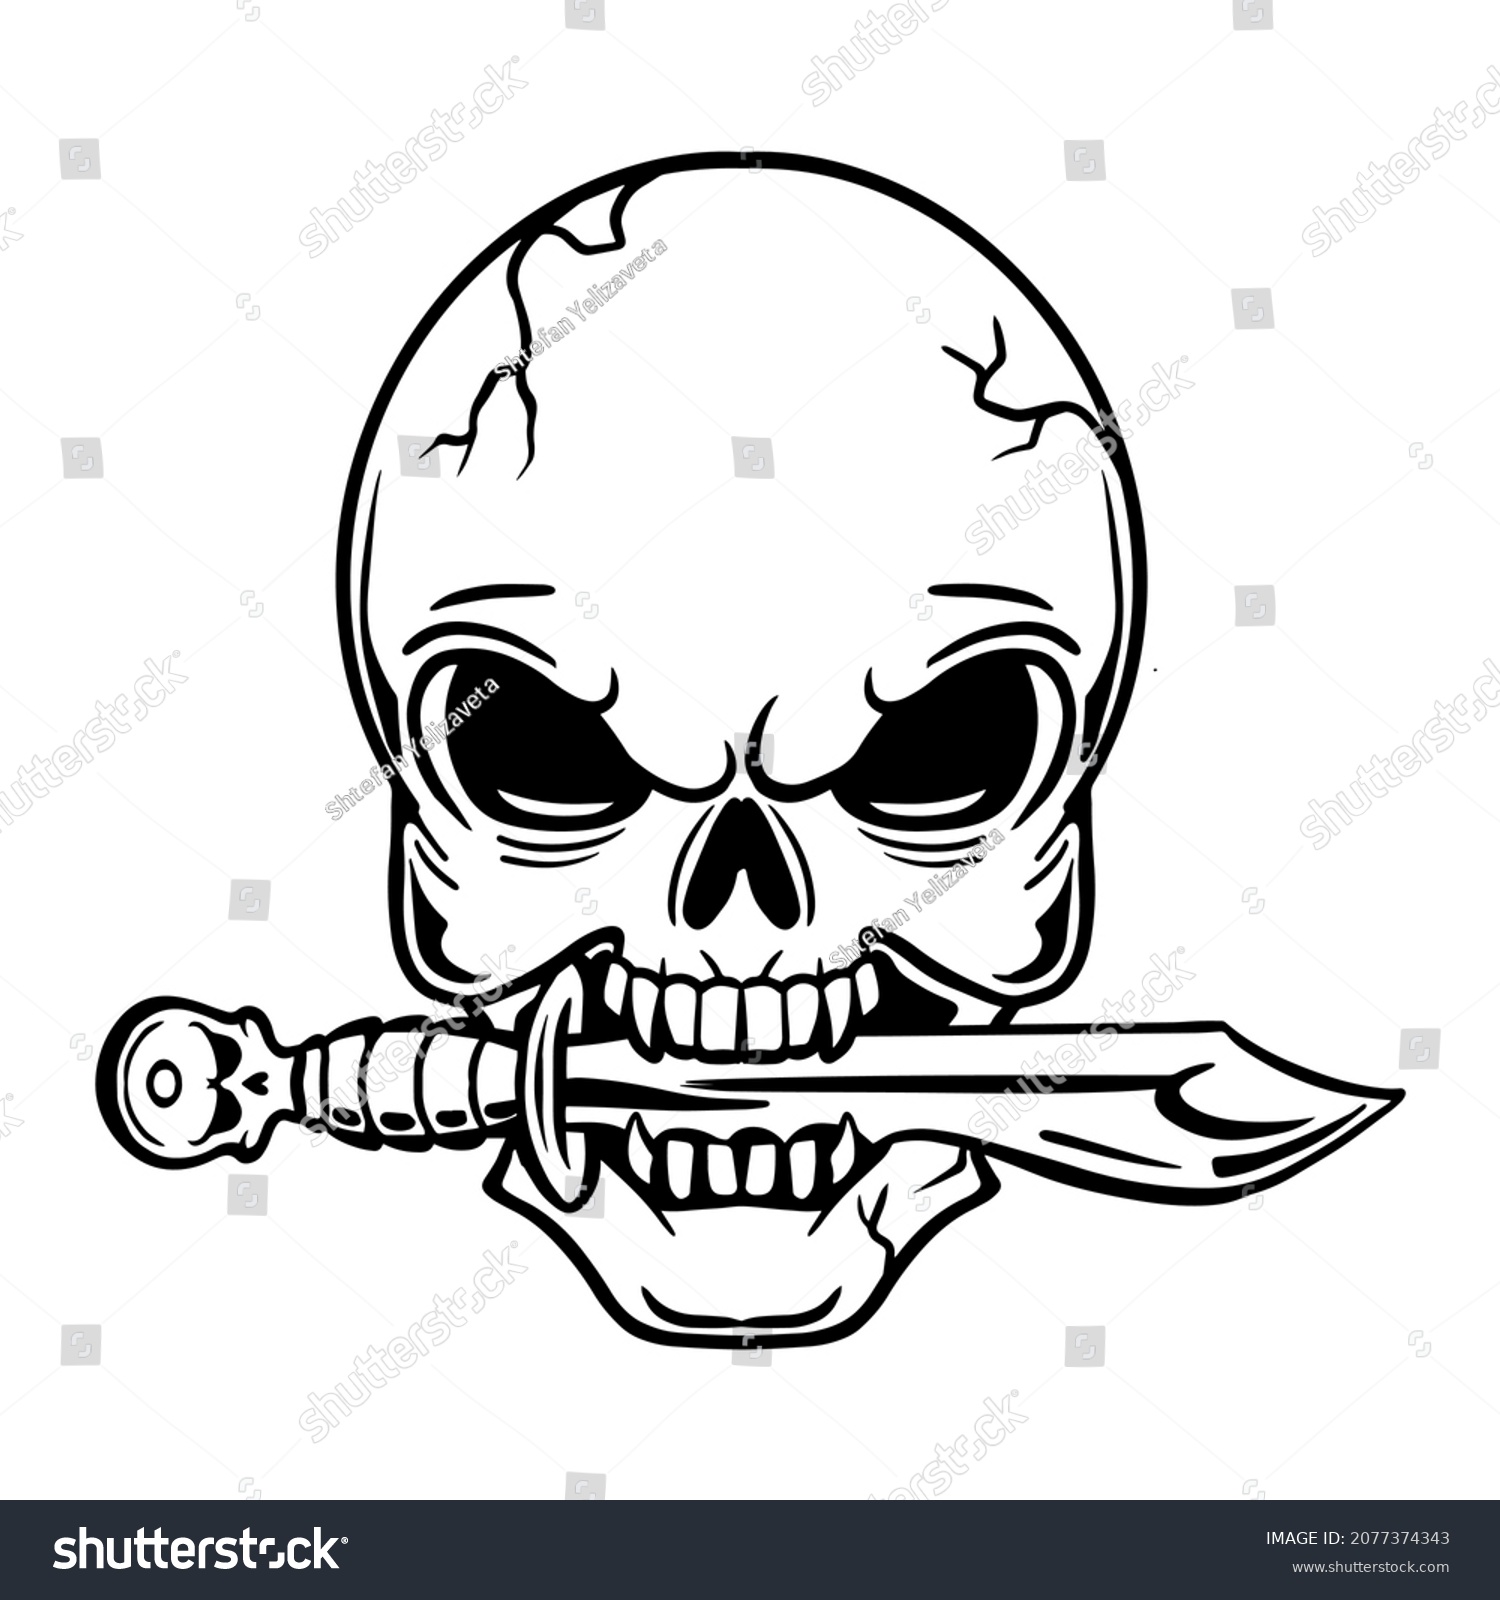 SVG of Skull pirate svg cut. Skull of a pirate with a saber in his teeth.Pirate skull emblem illustration with saber. svg